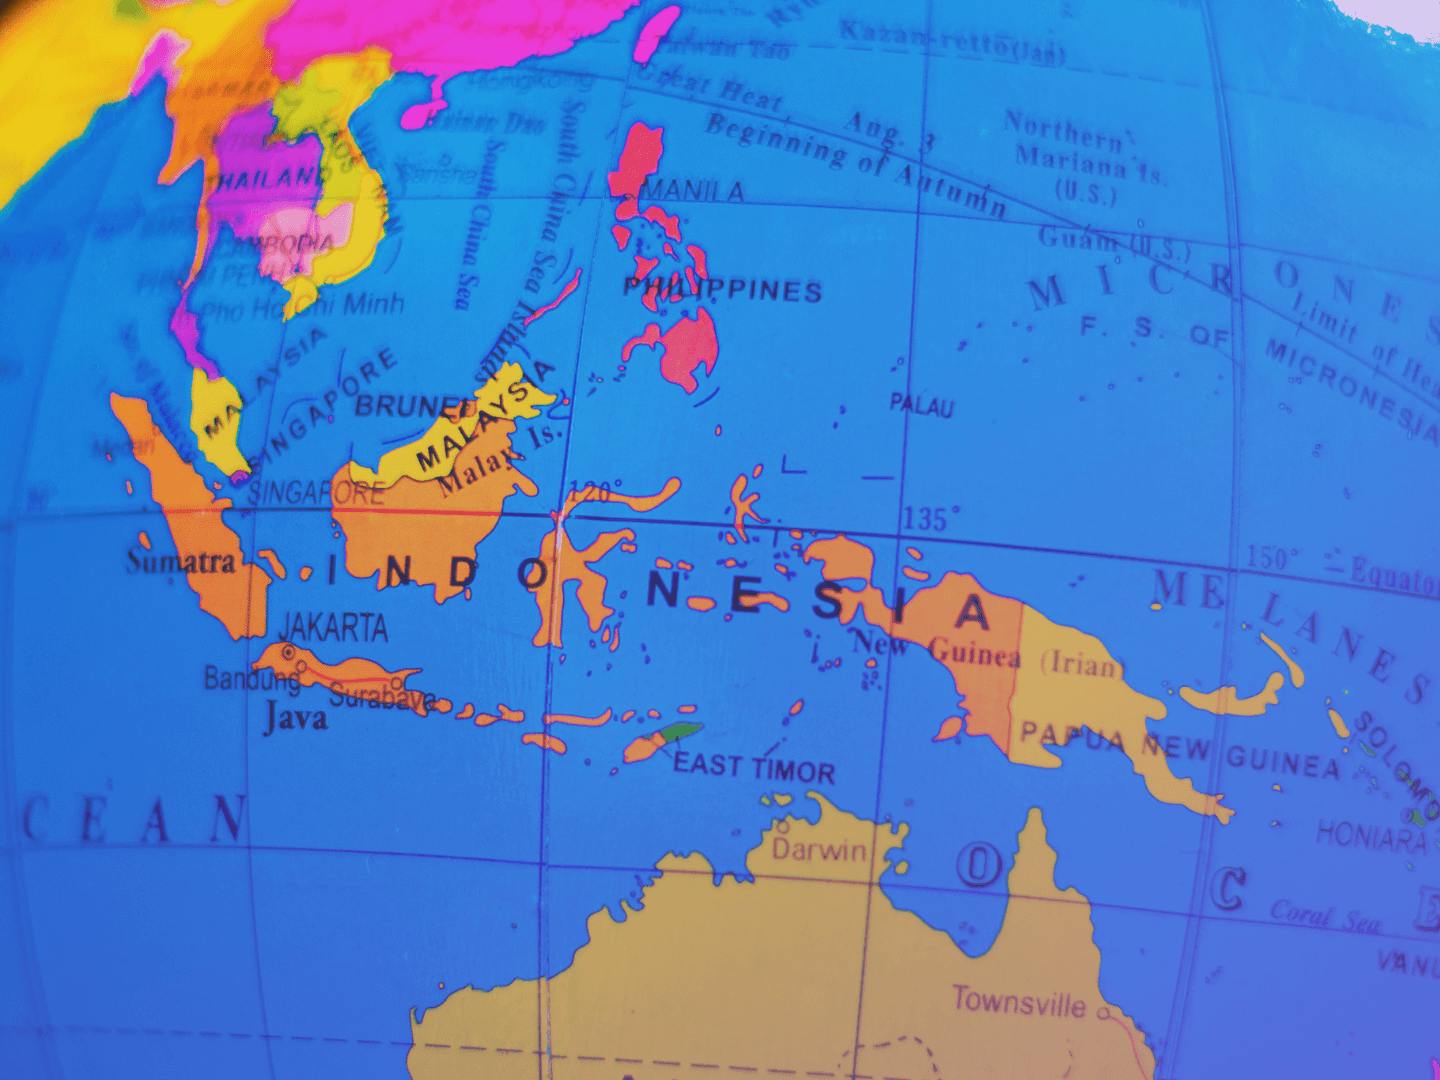 A close-up of a globe highlighting Indonesia.